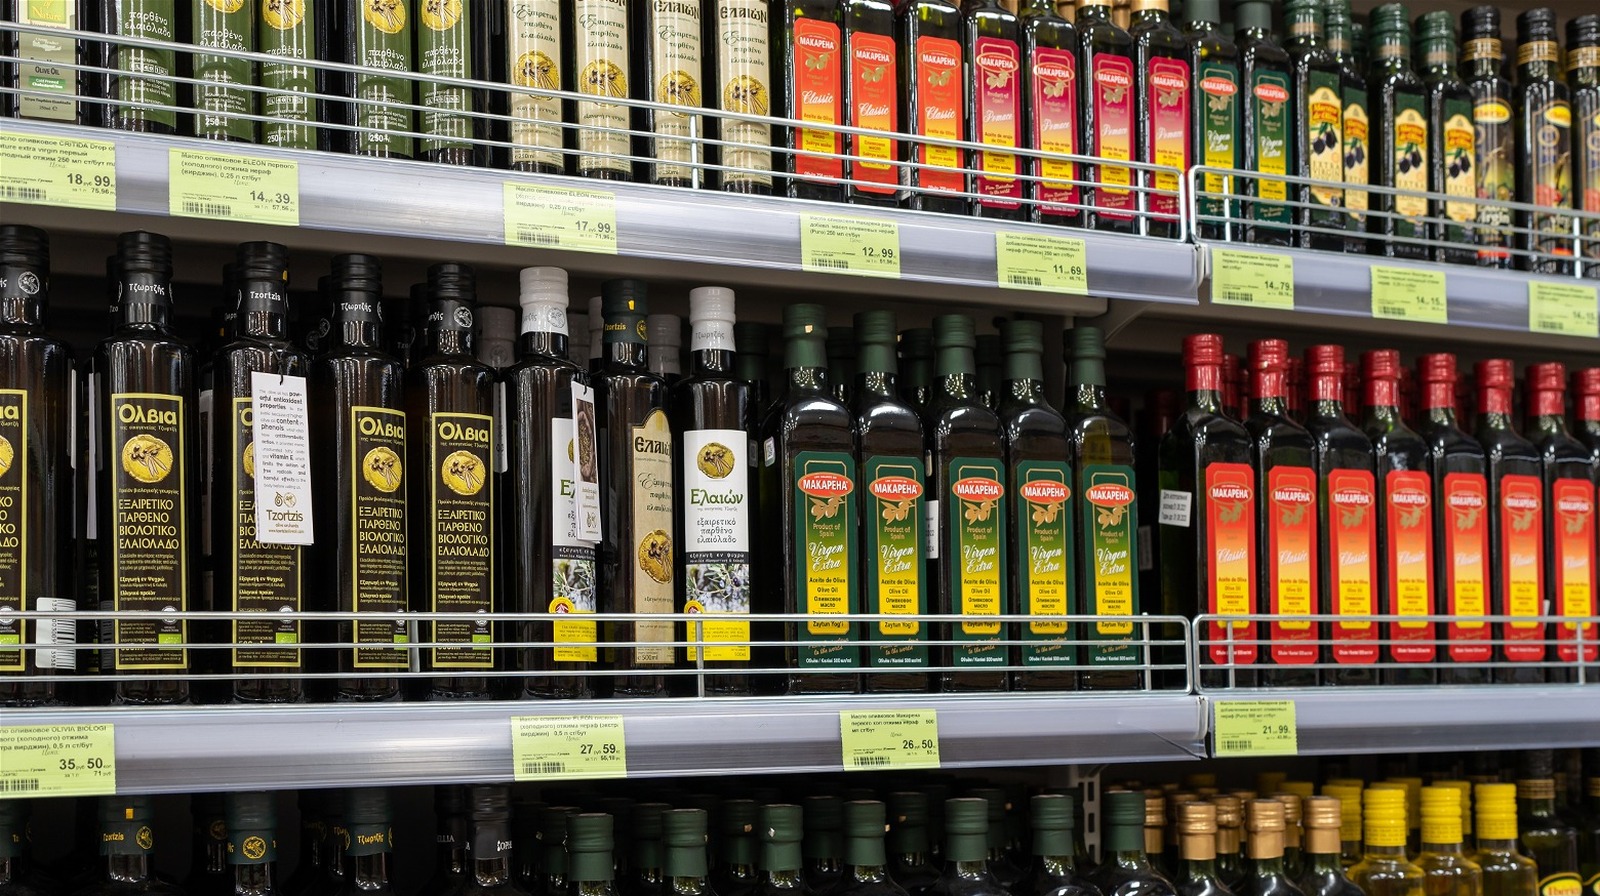 The Top 12 Olive Oil Brands, Ranked